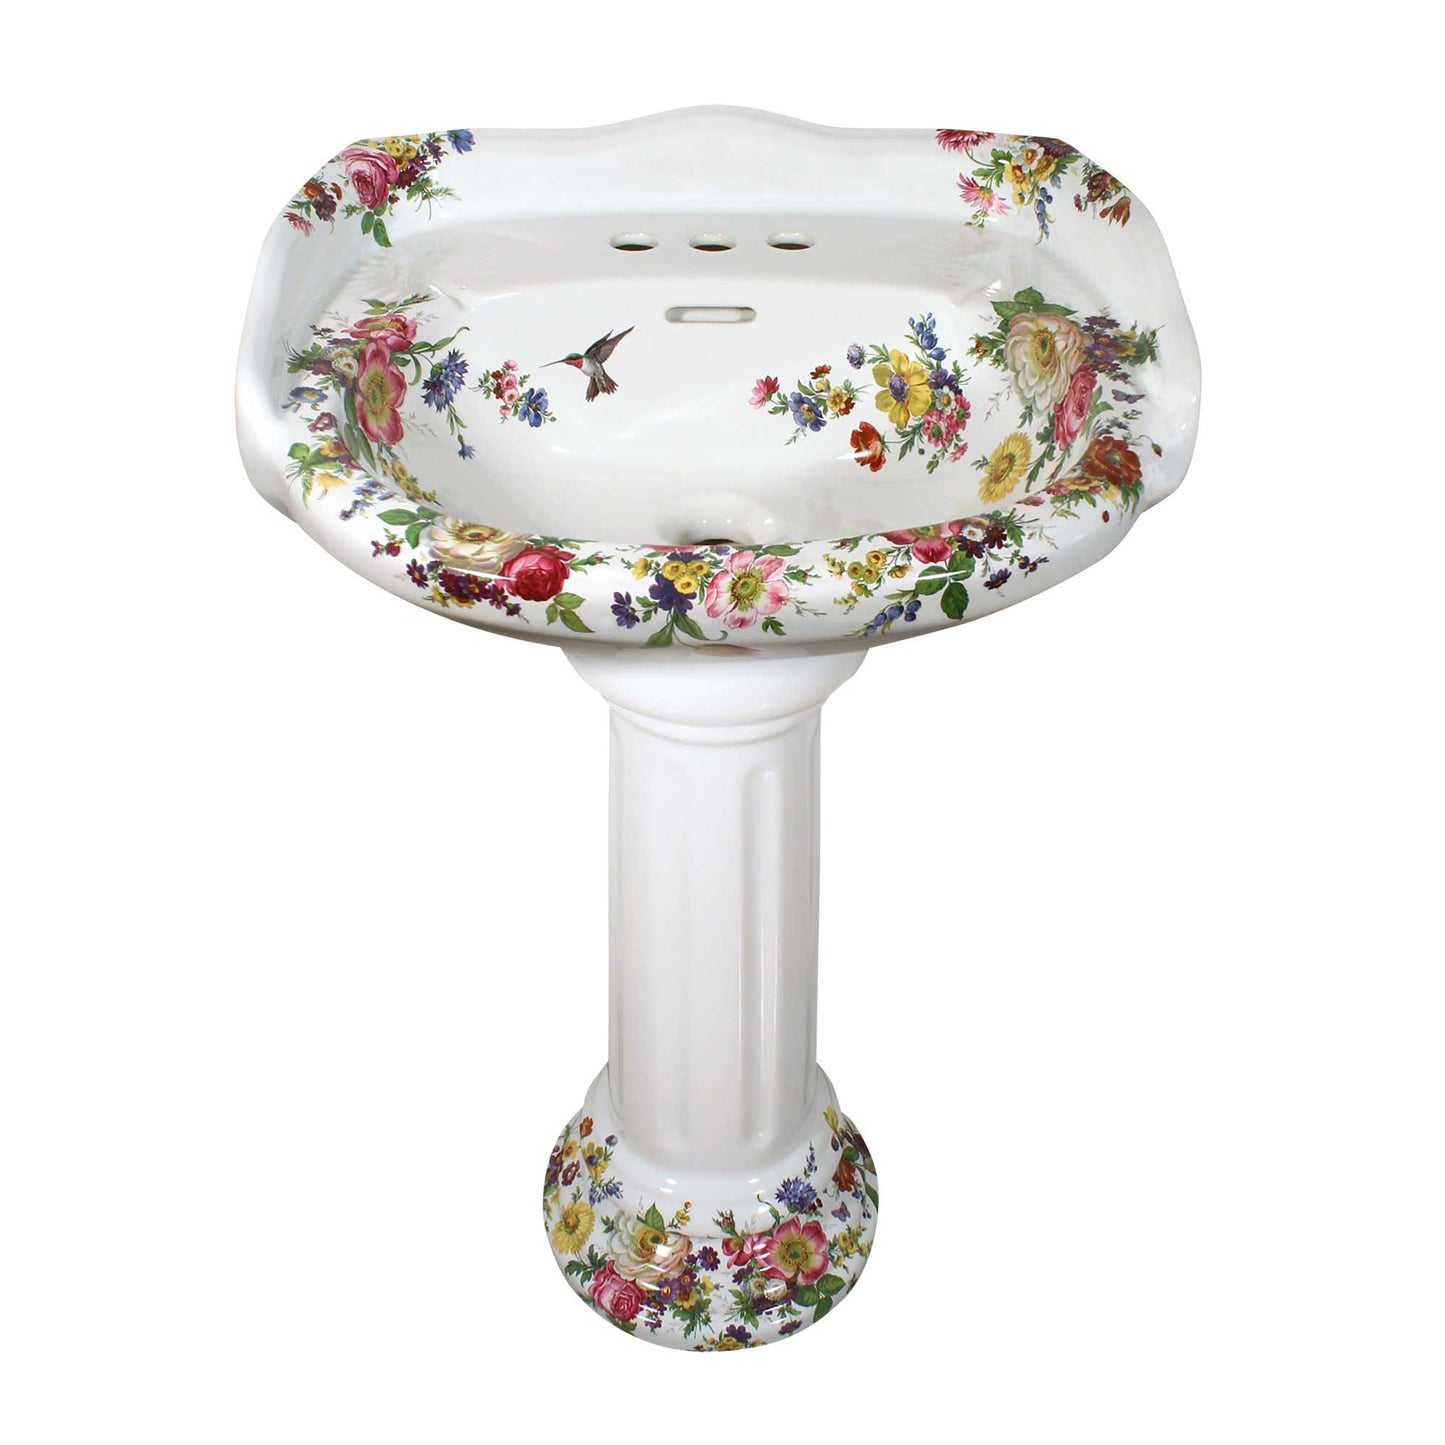 Victorian pedestal lavatory painted with flowers and hummingbird